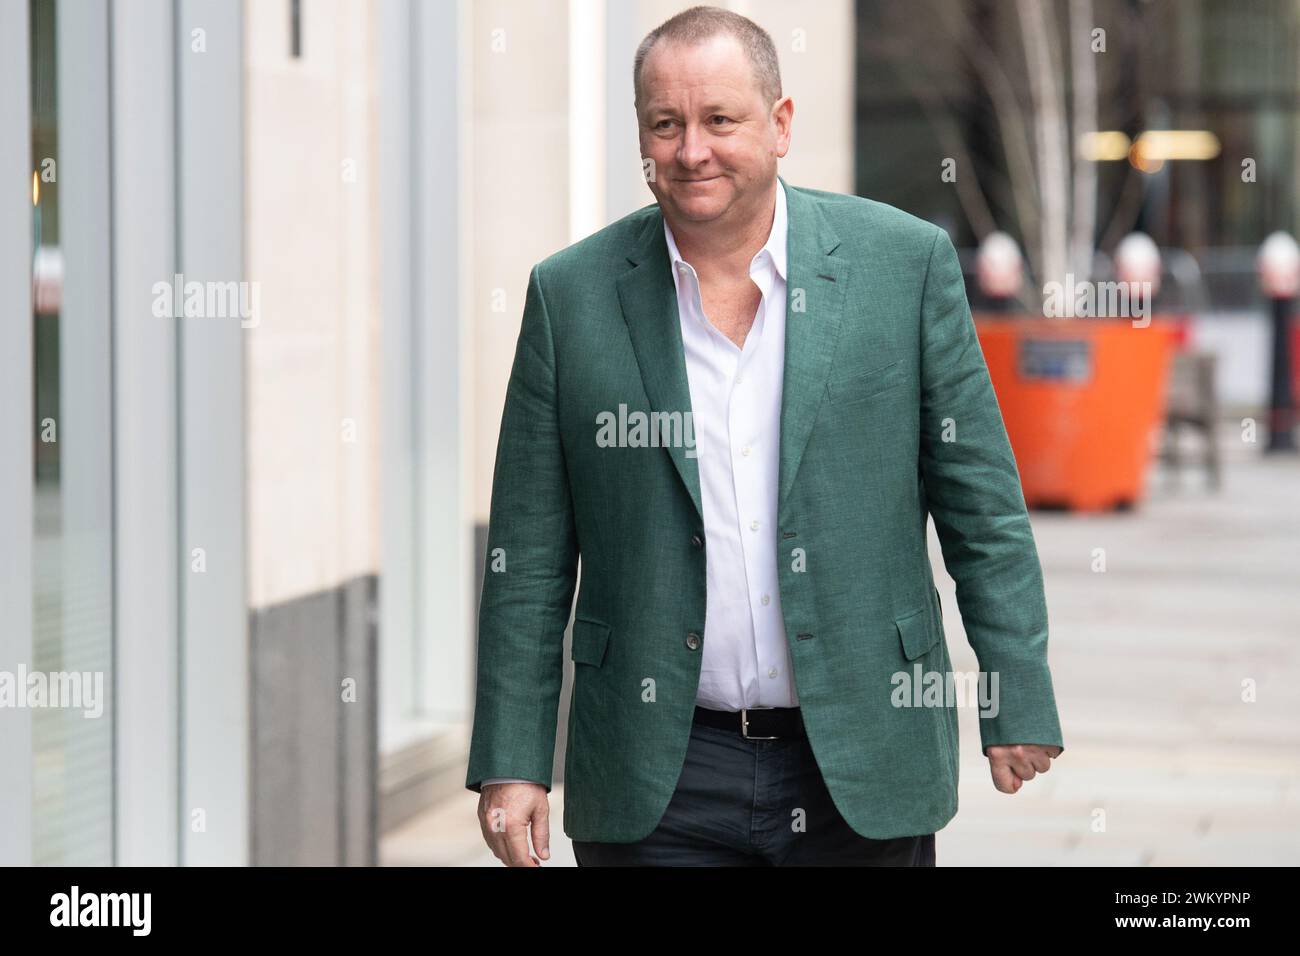 London, UK. 23 Feb 2024. Mike Ashley - Frasers Group Board Member (and former CEO) arrives at Rolls Building where his company Frasers Group is taking legal action against investment bank Morgan Stanley over the bank's attempts to force Frasers Group to abandon bets on the share price of Hugo Boss in 2021. . Credit: Justin Ng/Alamy Live News. Stock Photo